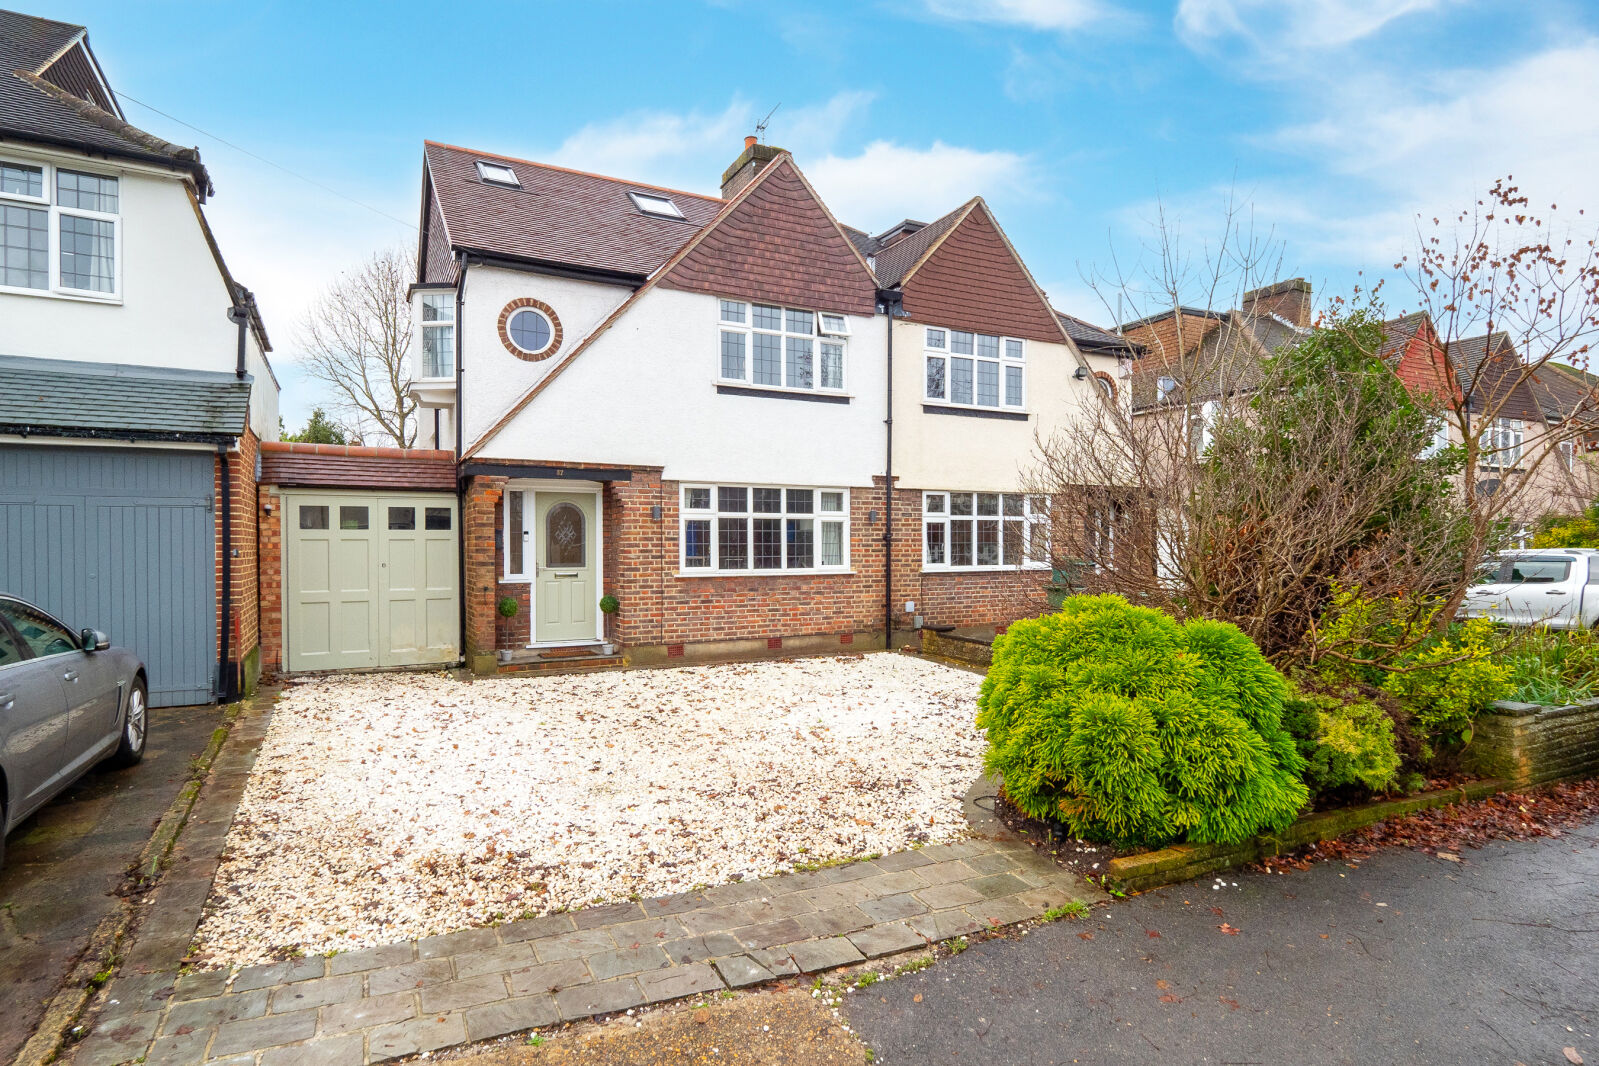 4 bedroom semi detached house for sale Ewell Park Way, Ewell, KT17, main image